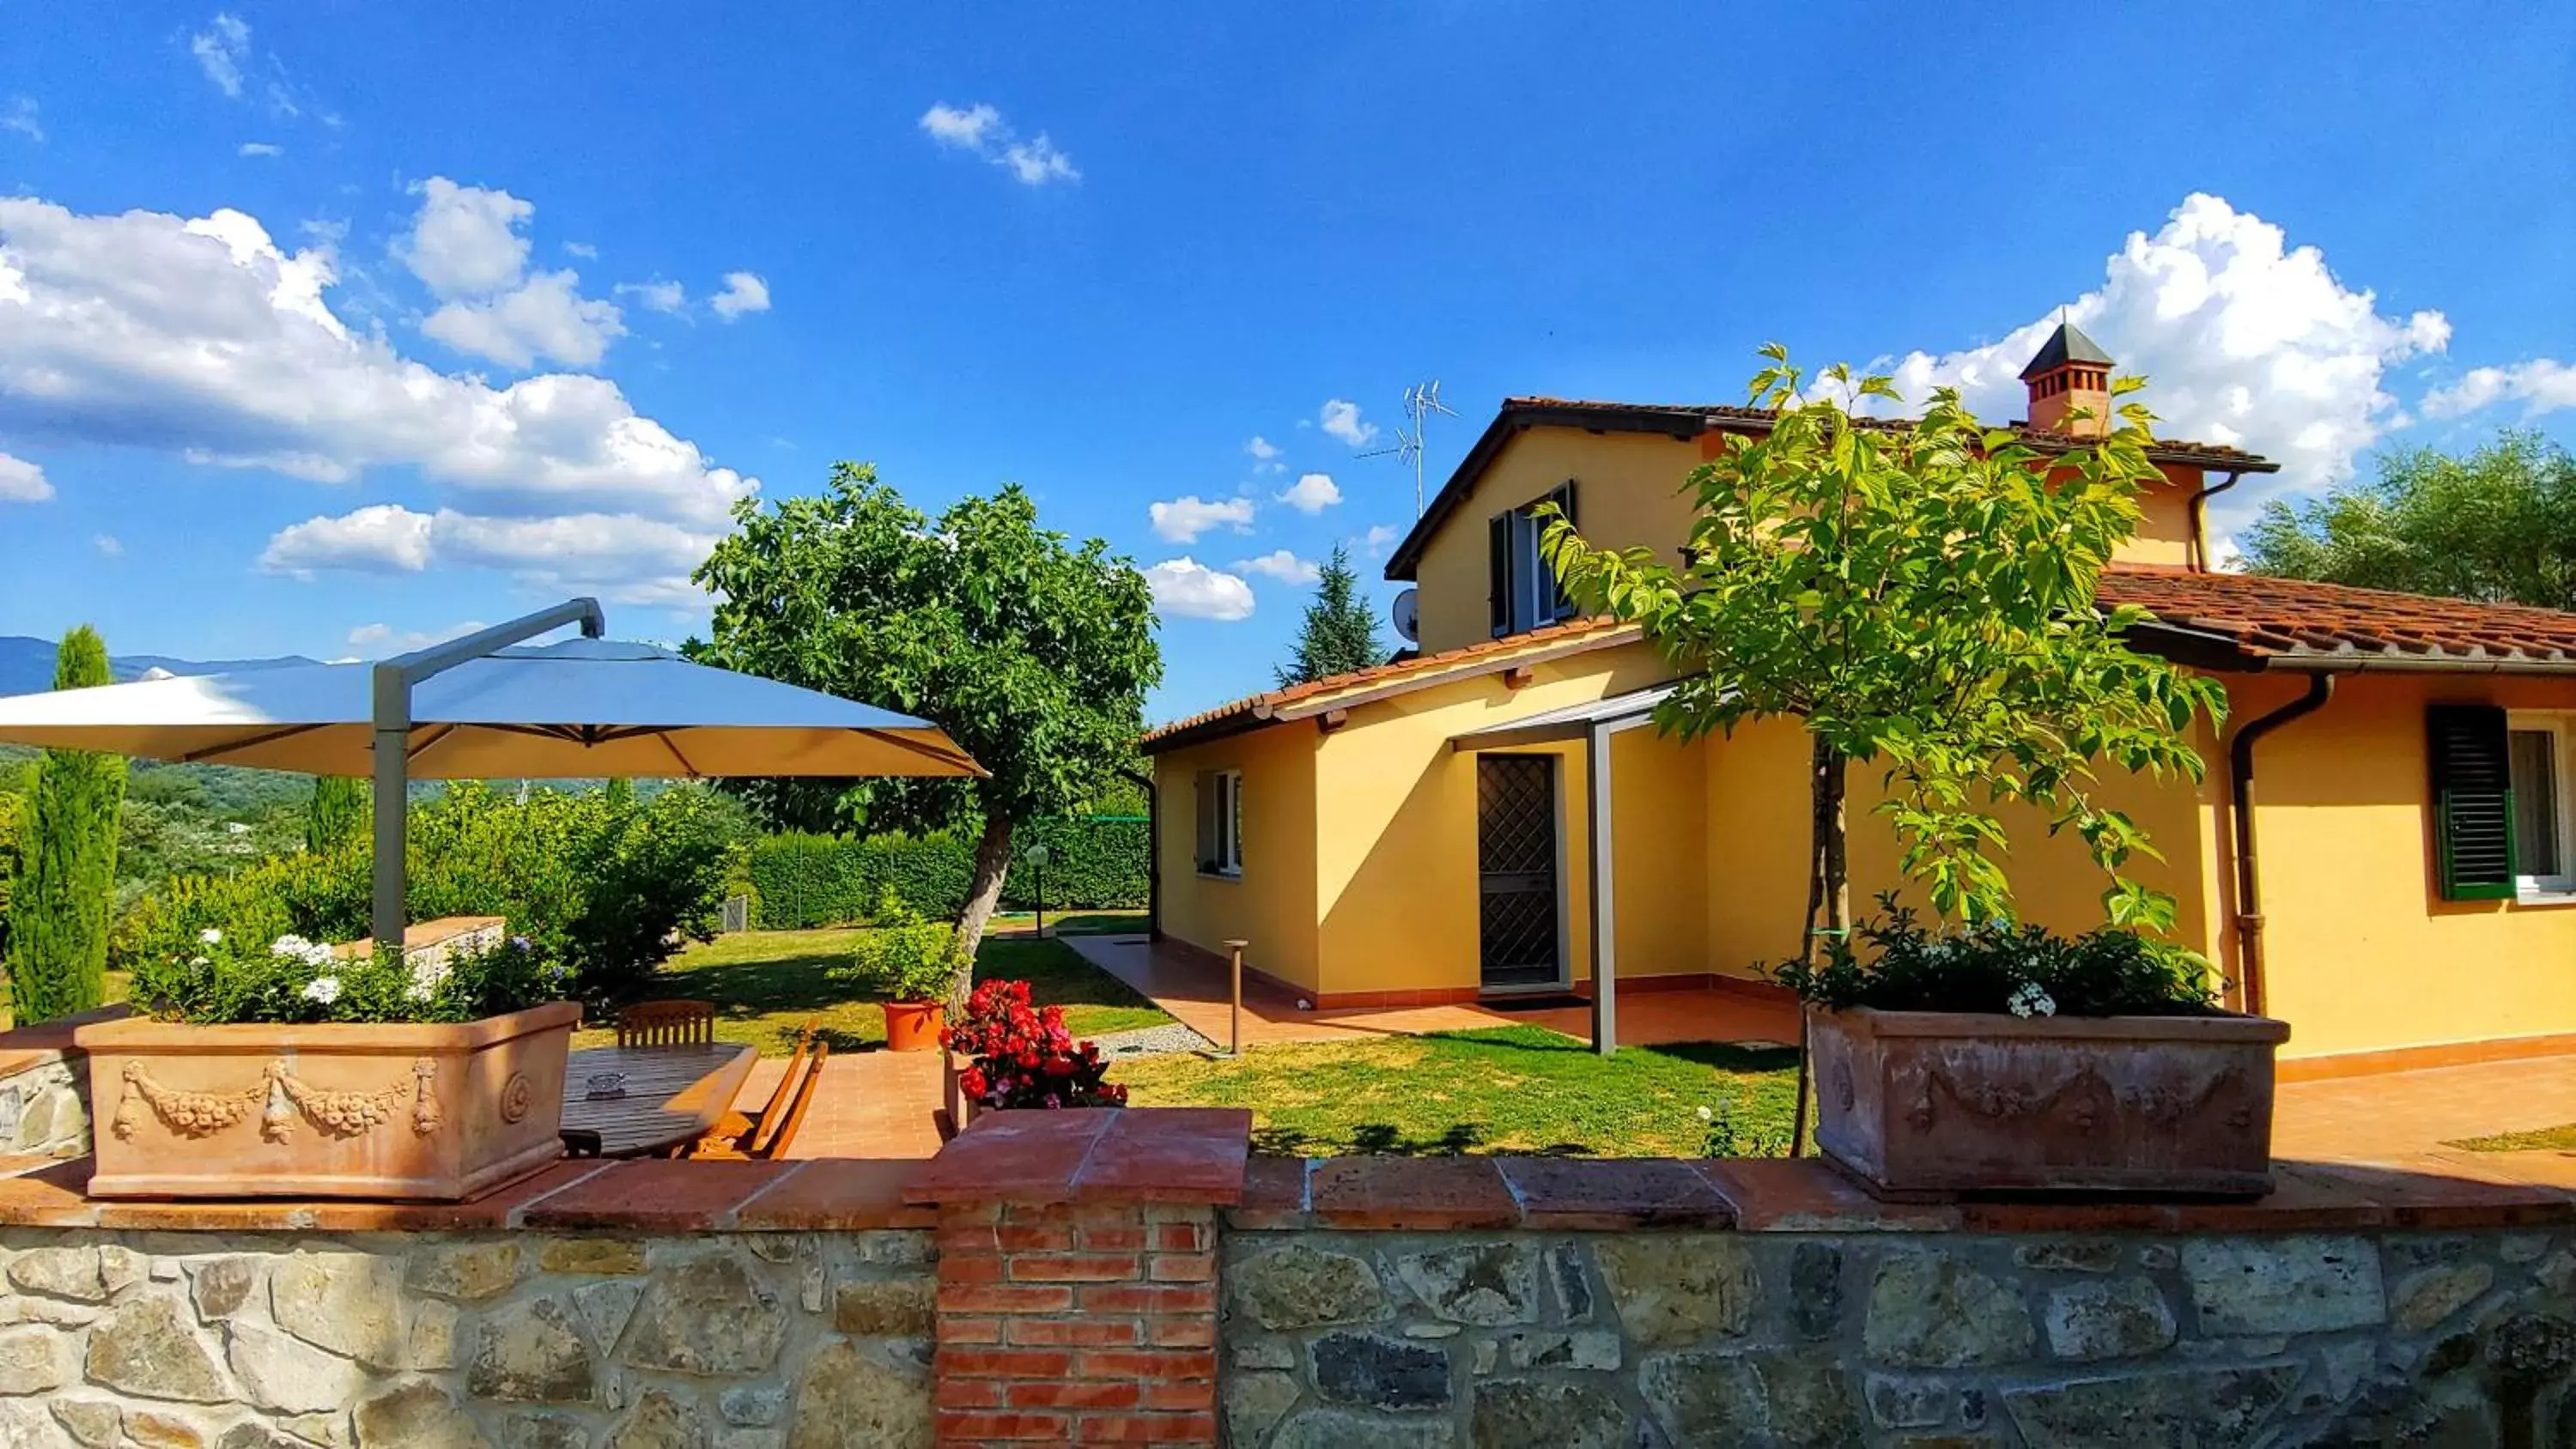 Patio, Property Building in Torrebianca Tuscany